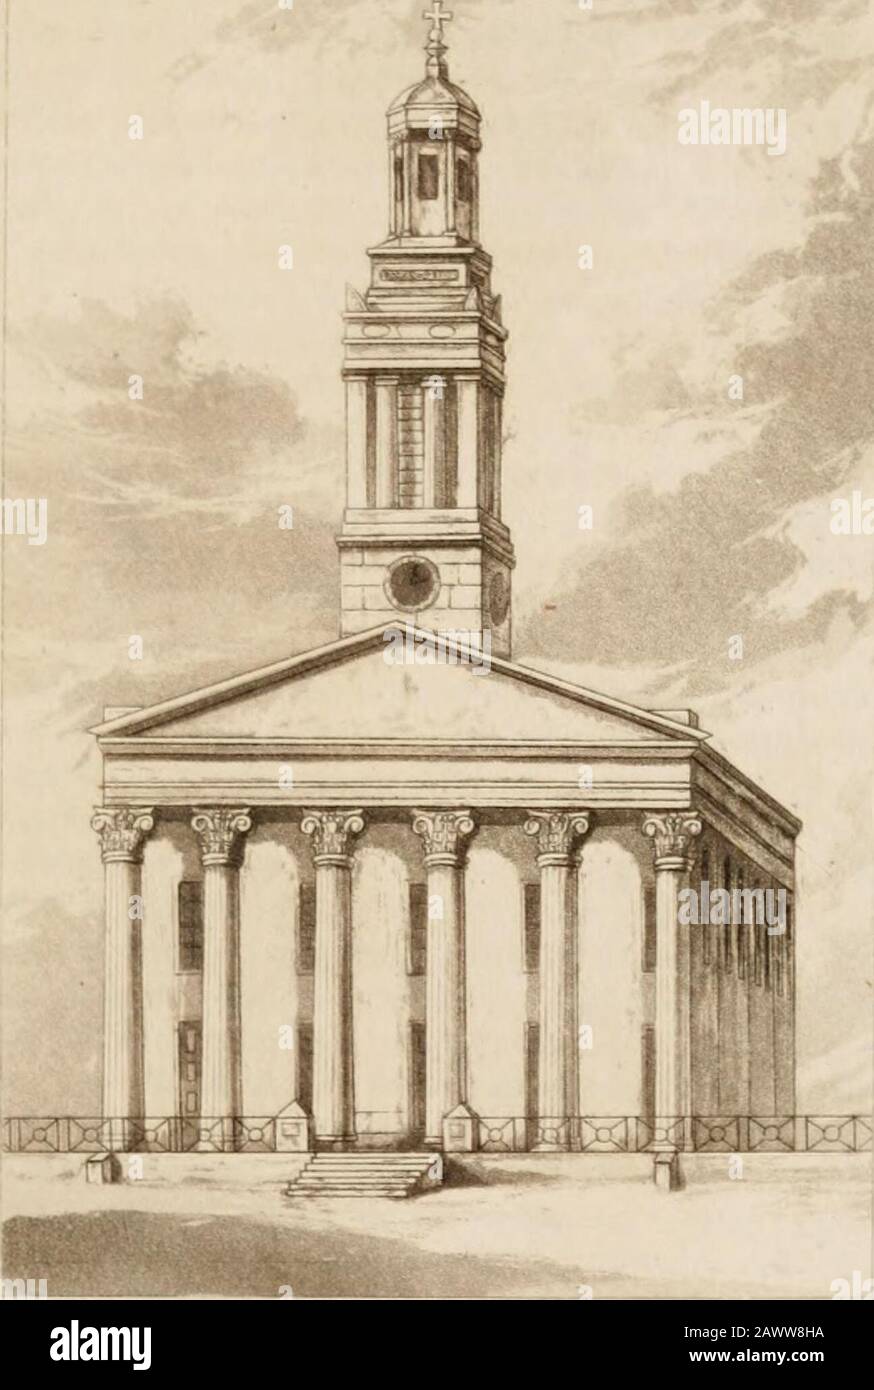 The history and antiquities of the parish of Lambeth, and the archiepiscopal palace .. . astyleportico of the Corinthian order raised upon steps. The columnsare fluted, and in point of detail differ materially from the speci-mens of the same order which we have been in the habit of see-ing in the buildings erected after the Italian school. What-ever might have been the defects of the style of building whichin the present day has given place to the elegant and lessformal introductions of Grecian art, the architect of the pre-sent building has not made the most felicitous choice in thepeculiar e Stock Photo